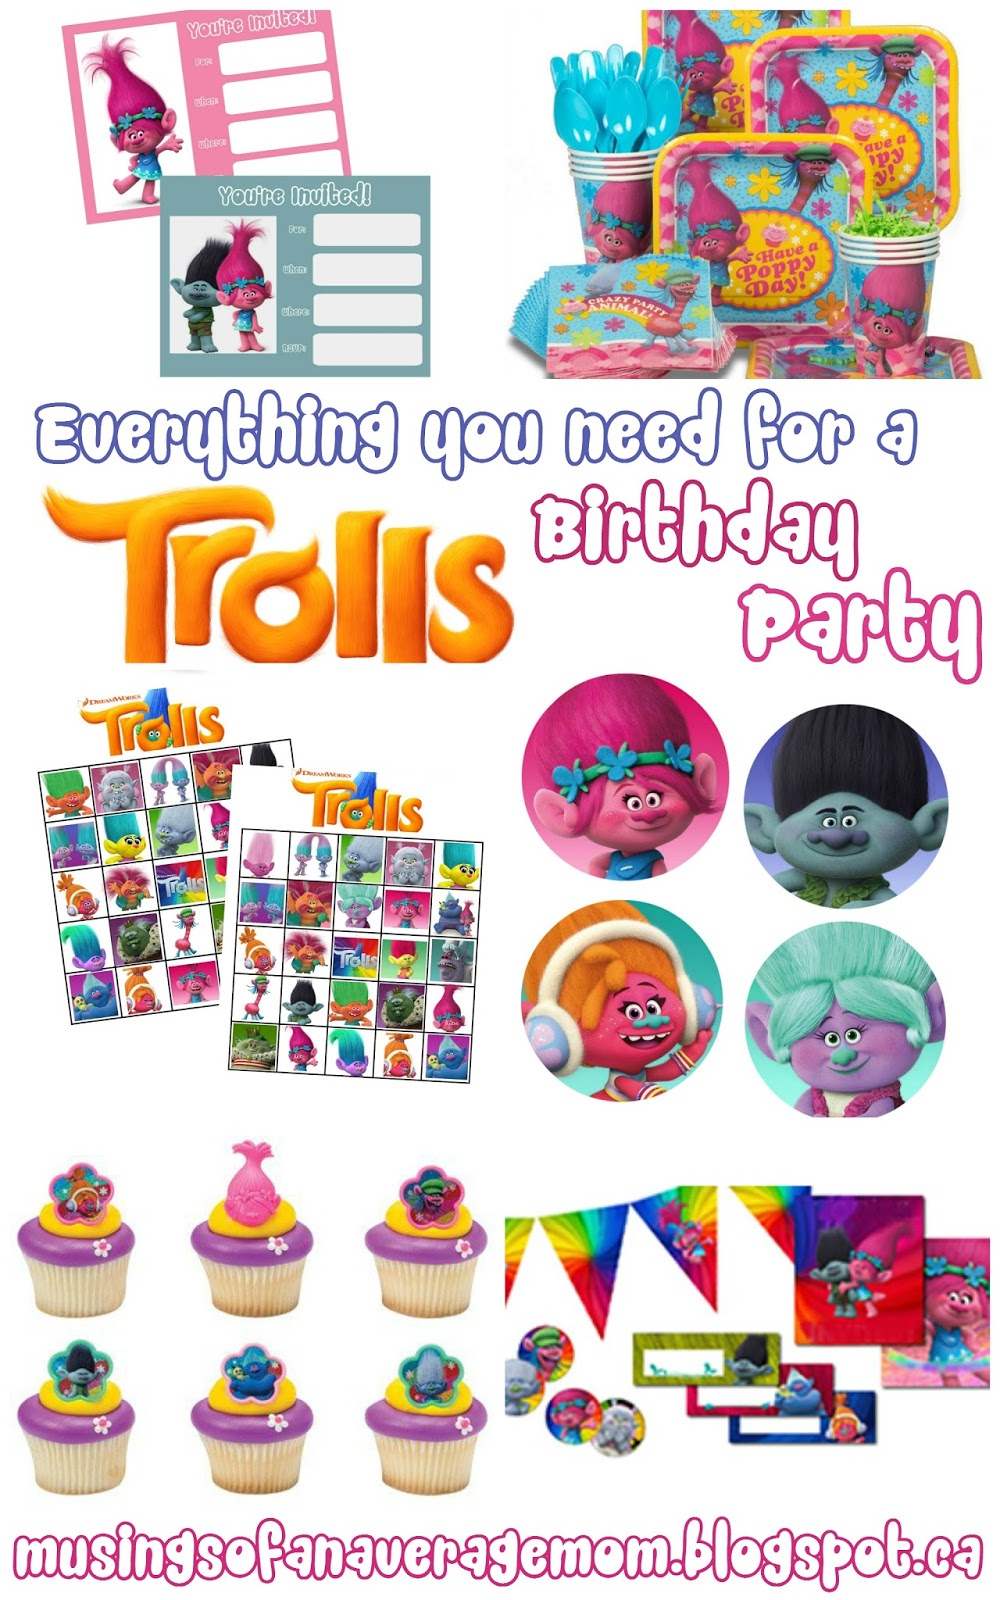 musings-of-an-average-mom-trolls-party-invitations